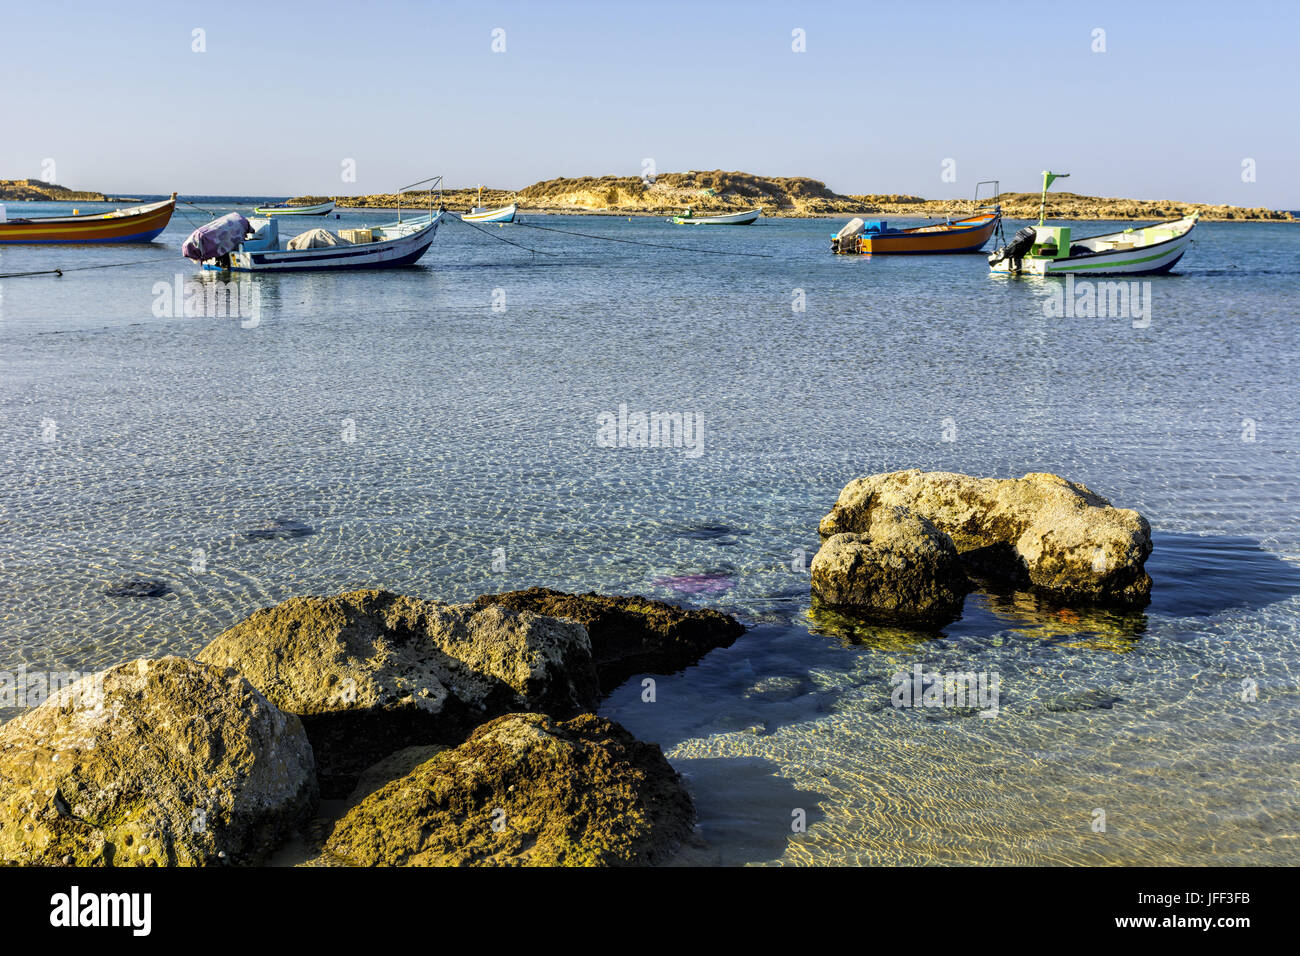 Fishing Boats Moored in Israel Stock Photo